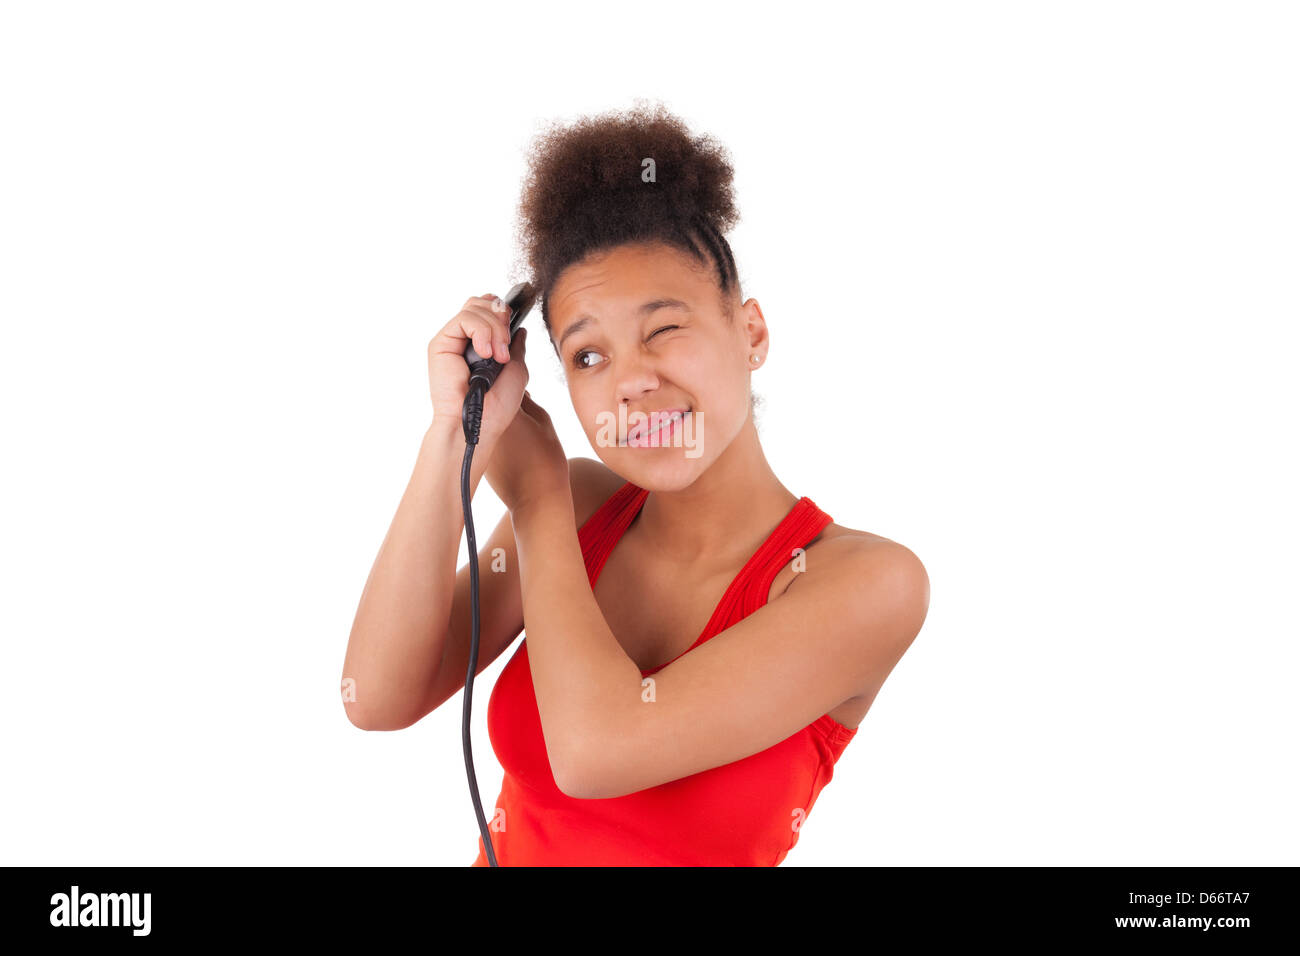 Afro-American young woman with afro hair Stock Photo